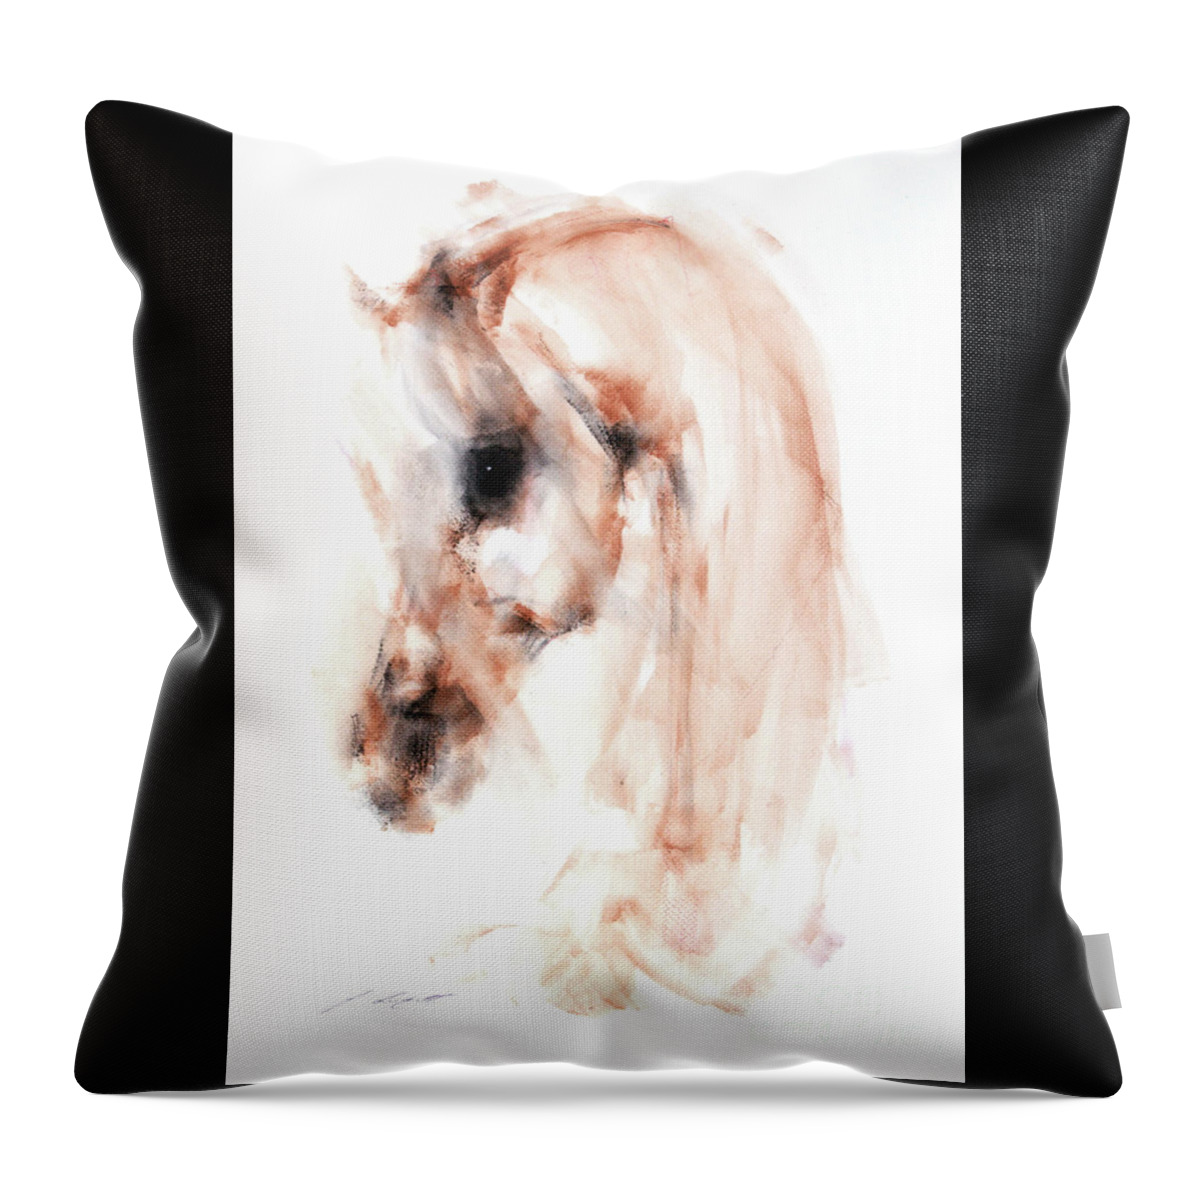 Equestrian Painting Throw Pillow featuring the painting Lexus by Janette Lockett